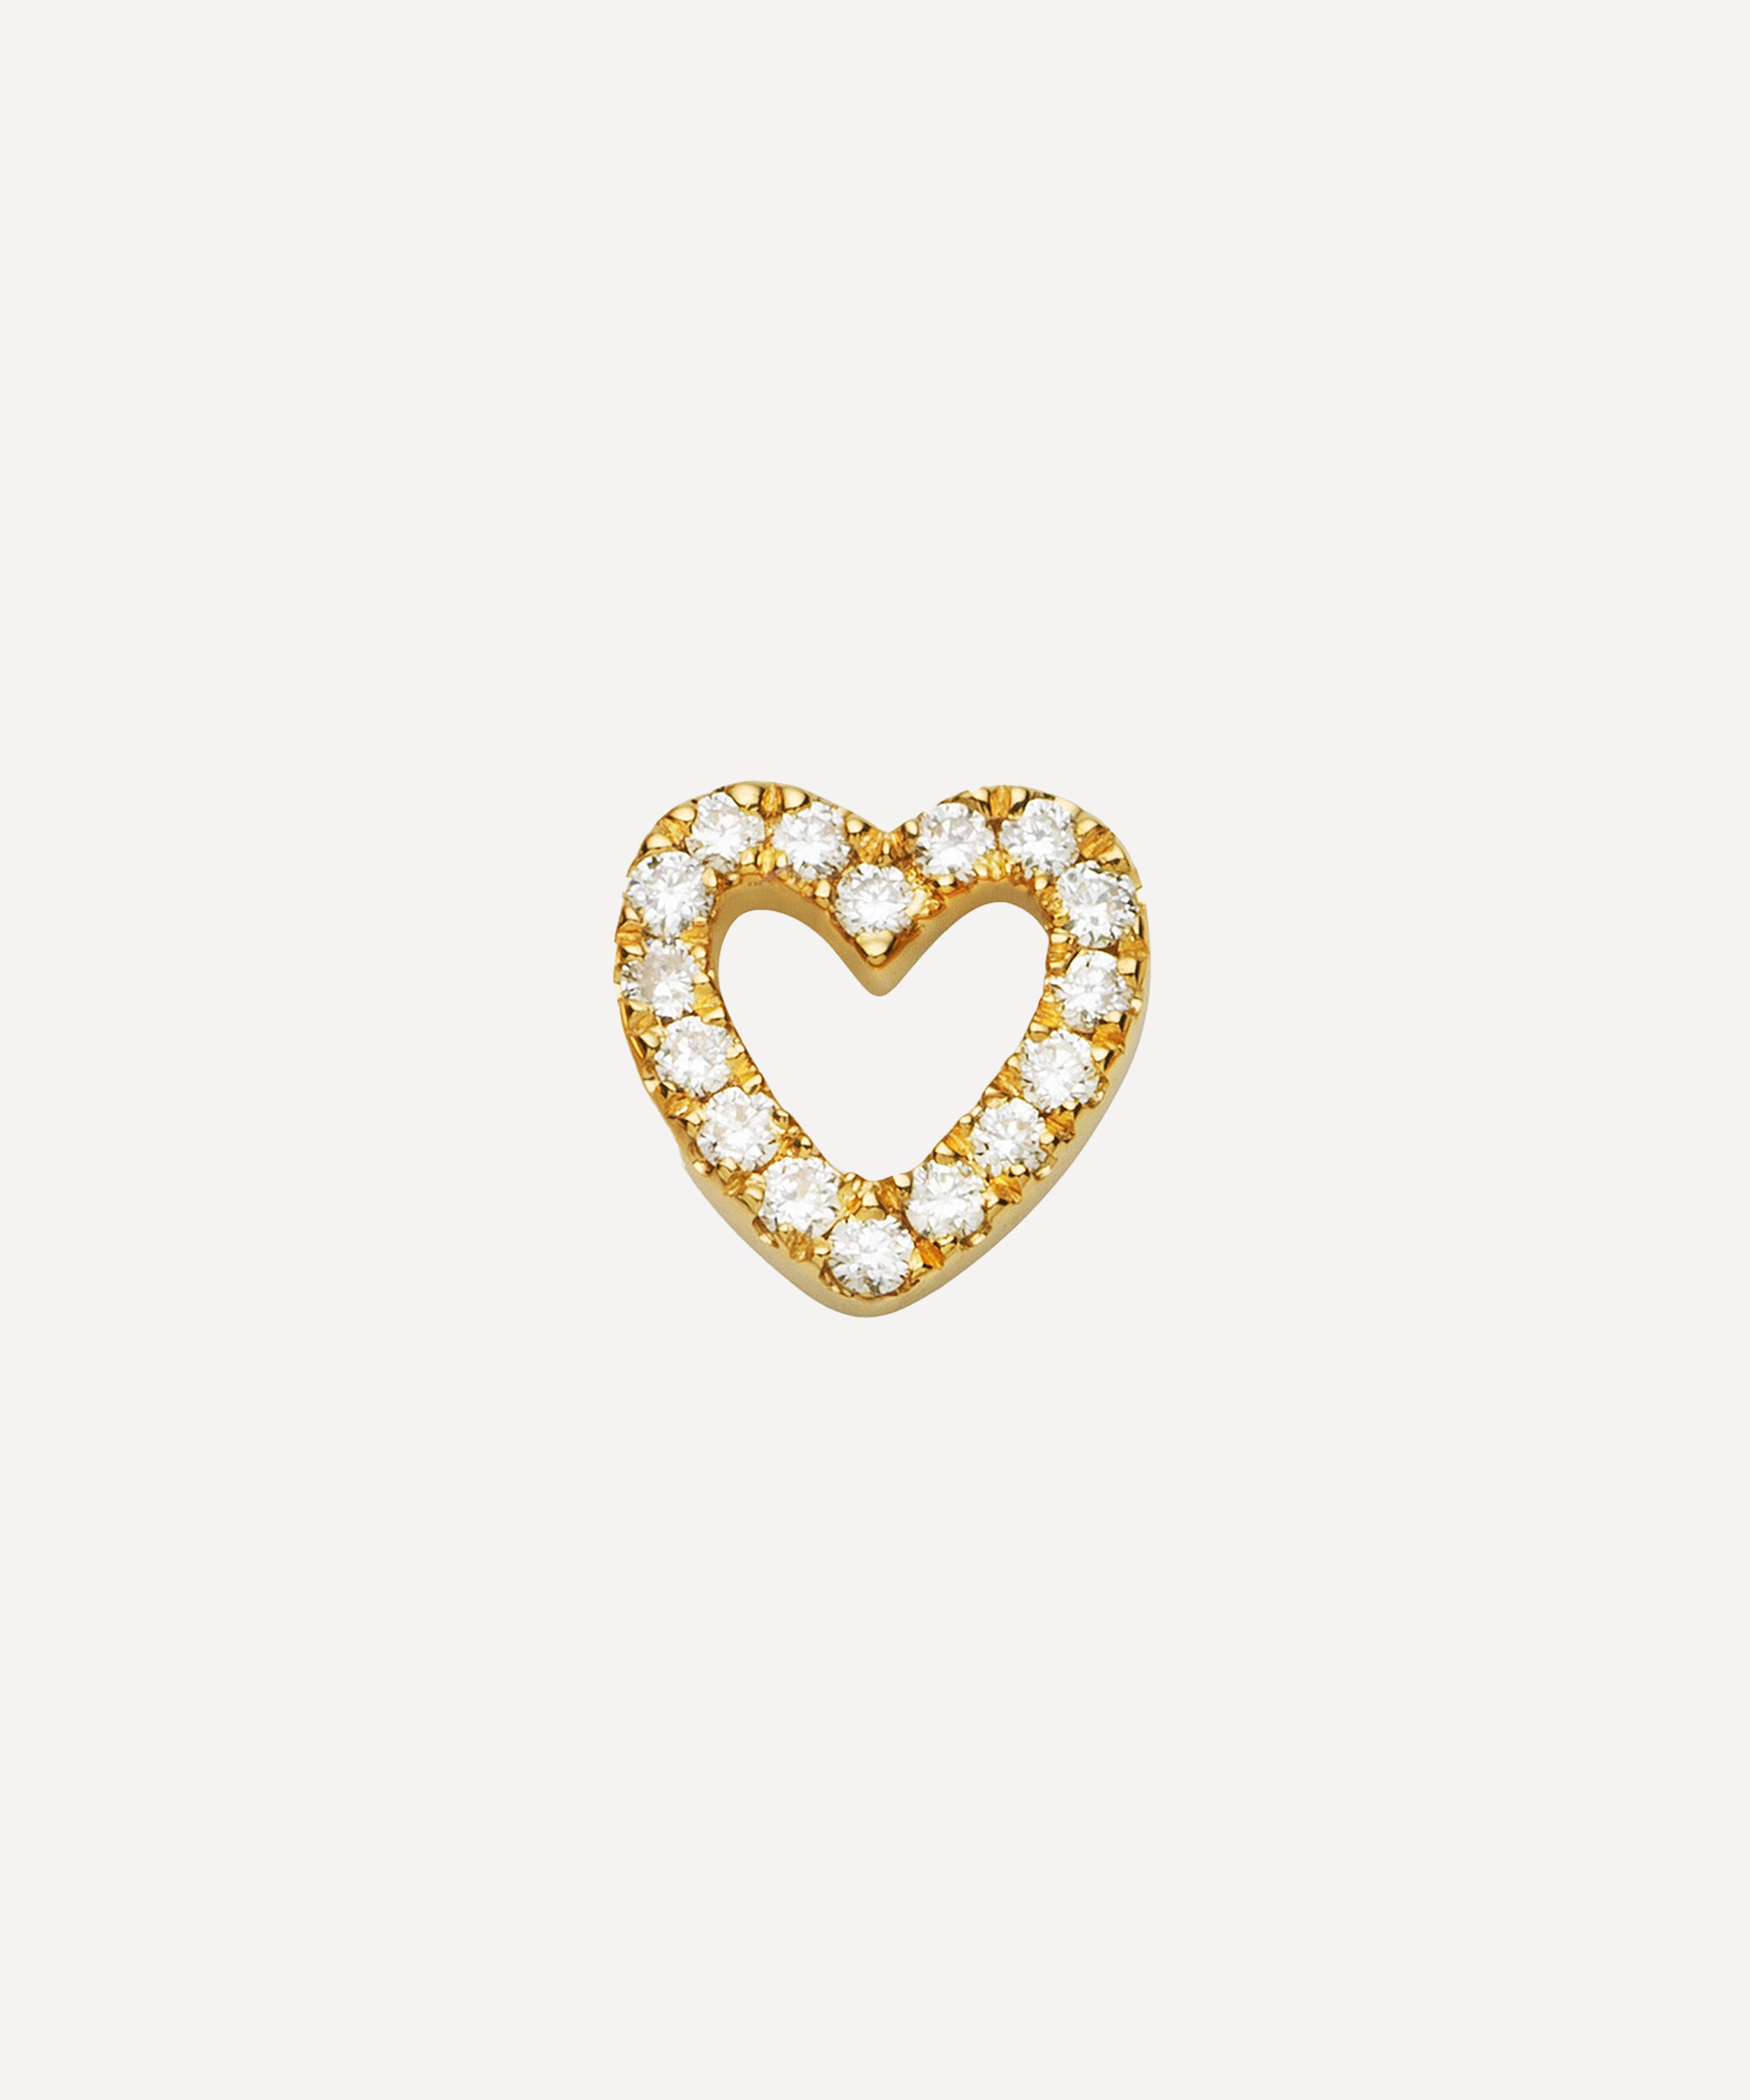 Loquet London - 18ct Gold With Love Diamond Heart Charm